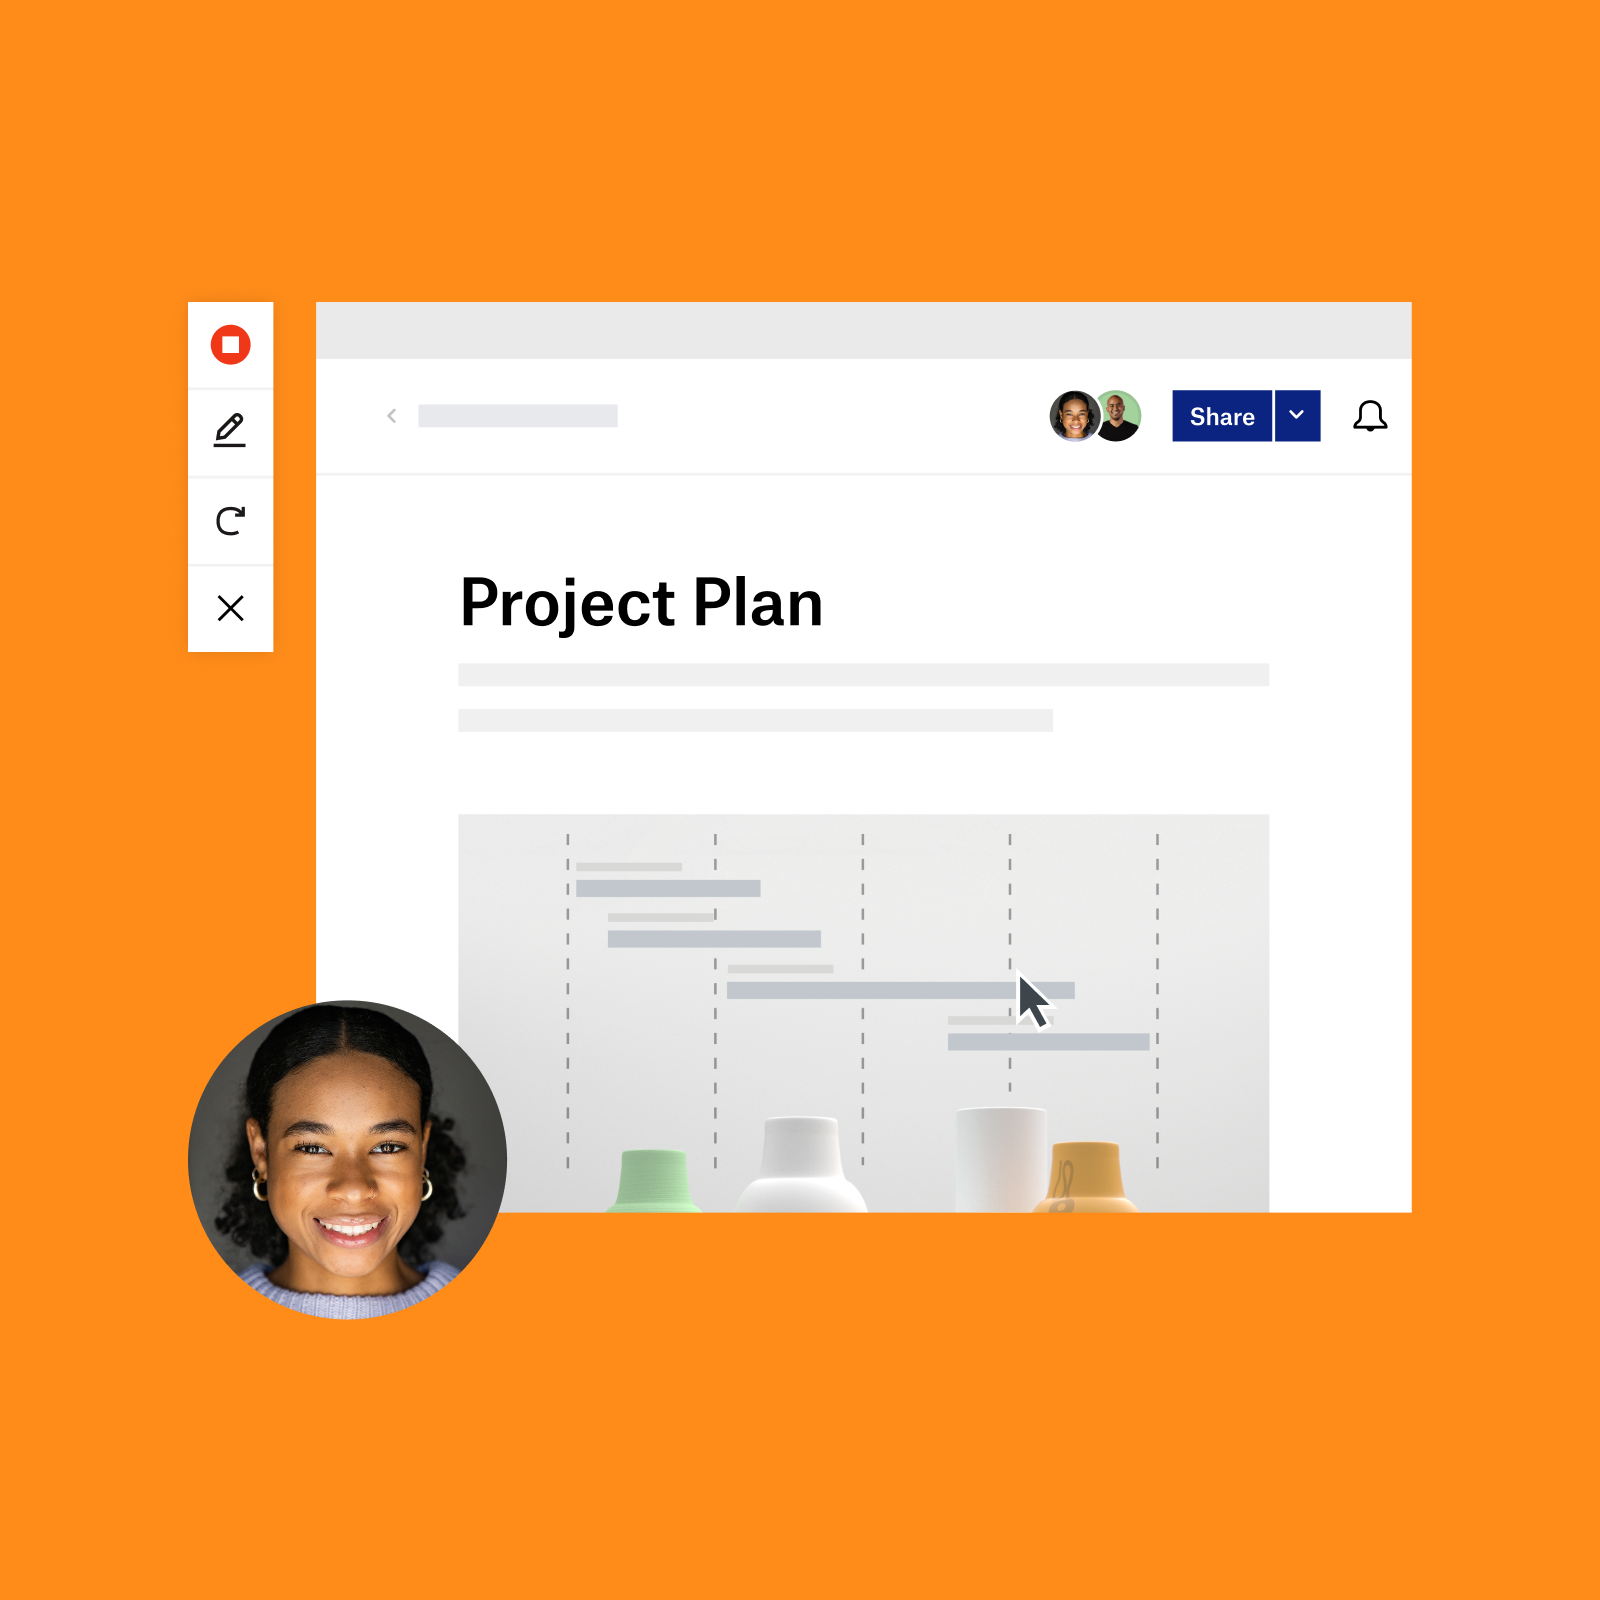 UI of a person talking through a project plan in a video